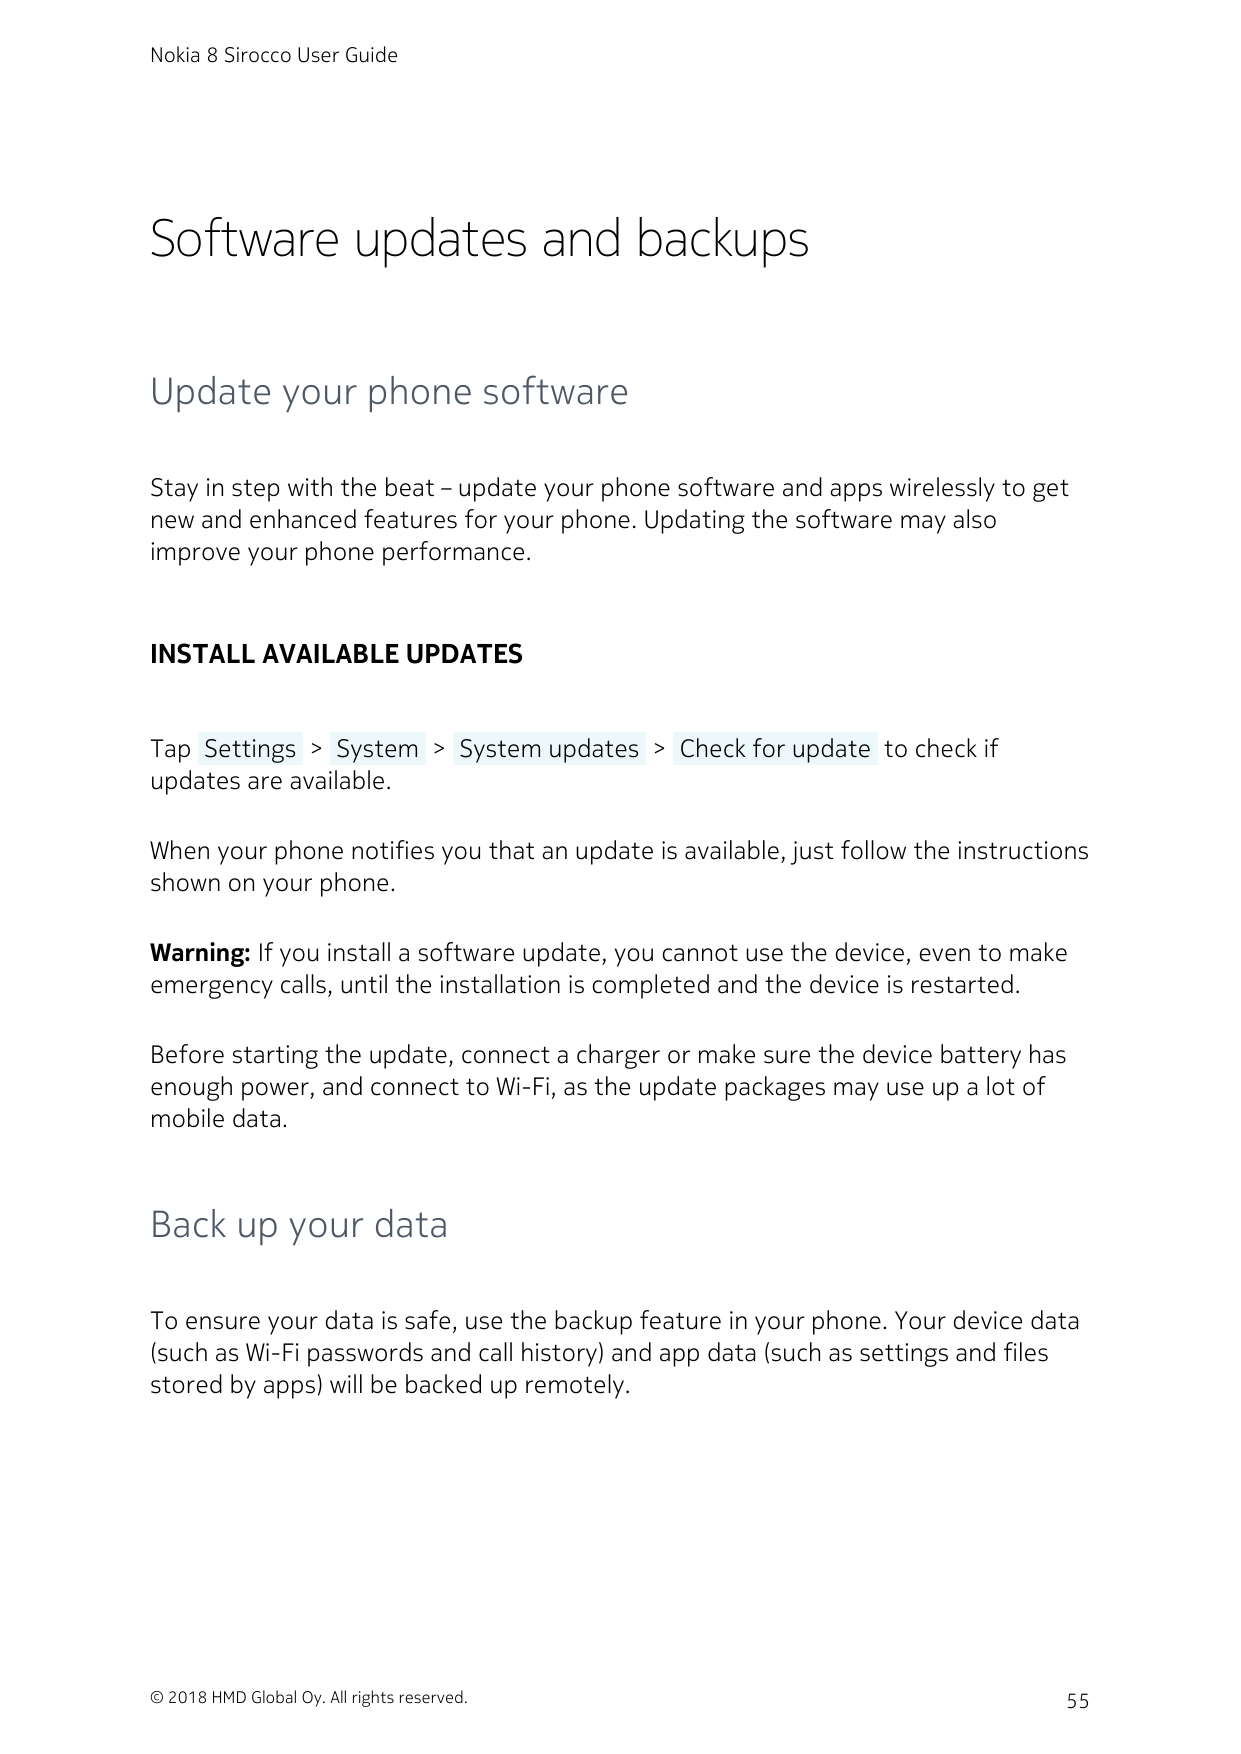 Nokia 8 Sirocco User GuideSoftware updates and backupsUpdate your phone softwareStay in step with the beat – update your phone s